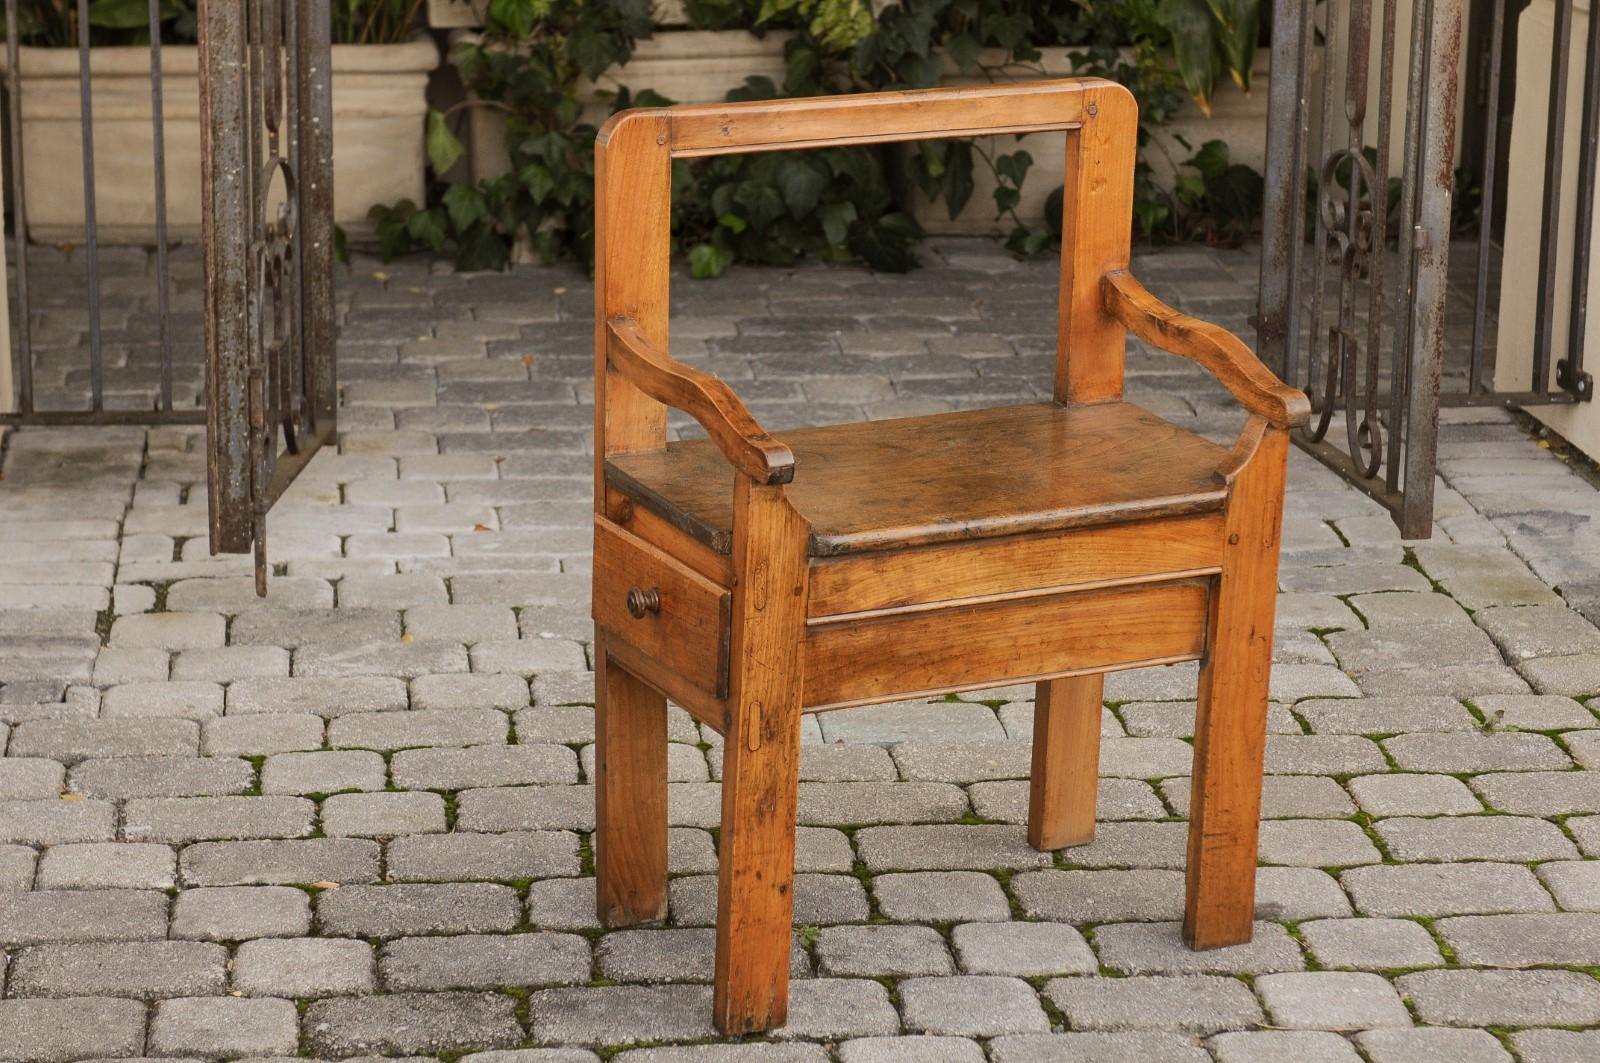 A rustic French fruitwood chair from the early 19th century, with open back, single lateral drawer and straight legs. Born during the second decade of the 19th century during the French Restauration period, this charming rustic chair features a